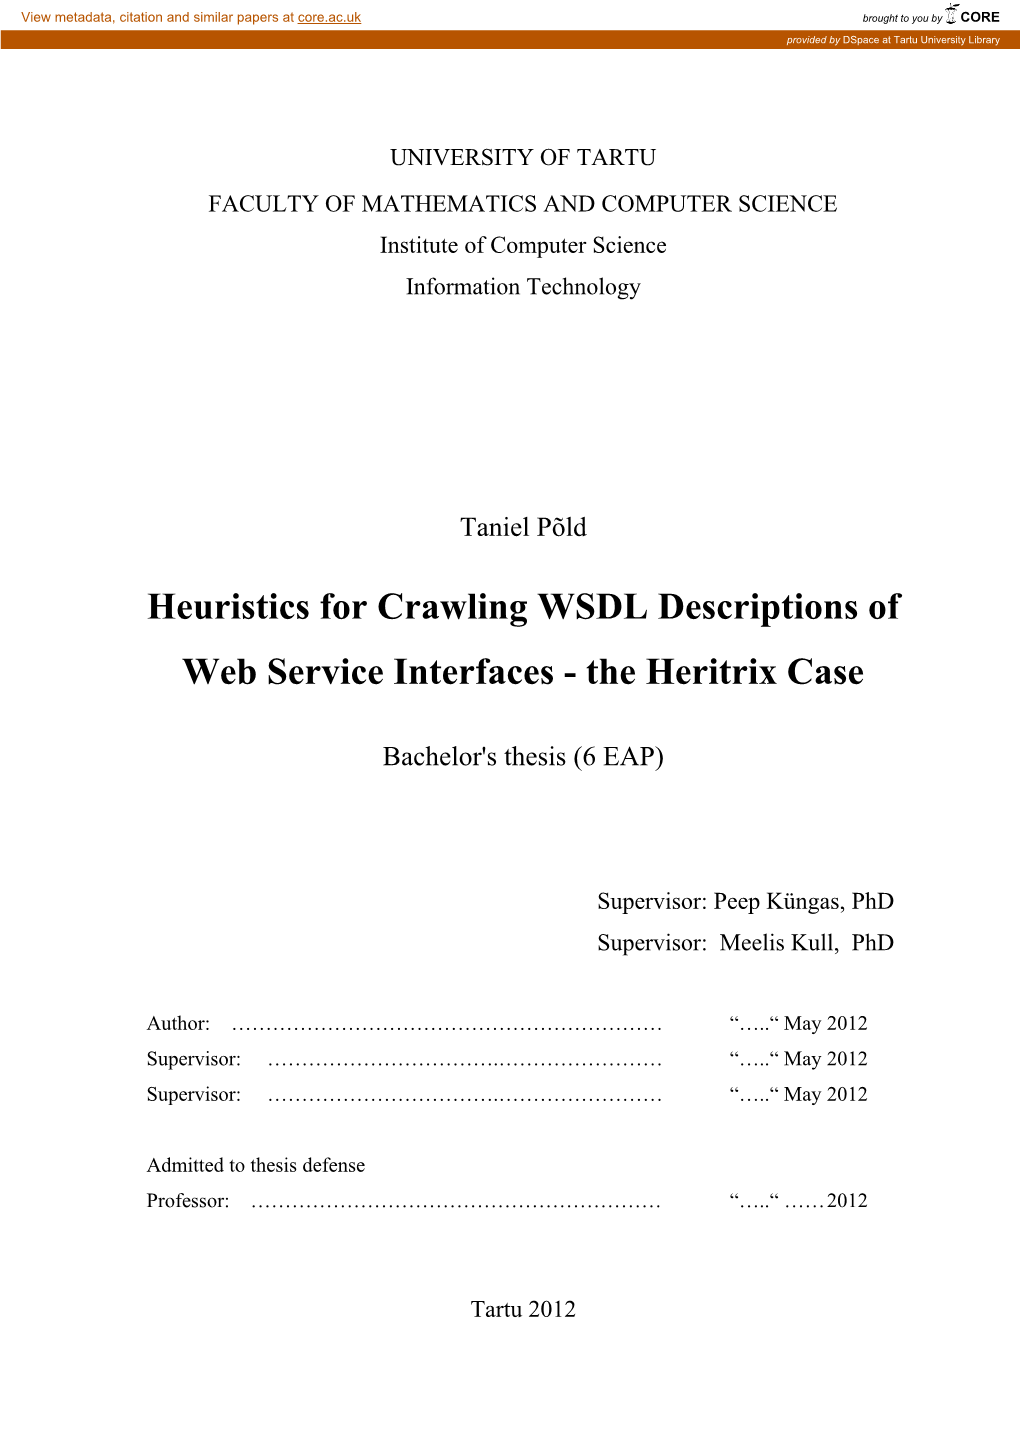 Heuristics for Crawling WSDL Descriptions of Web Service Interfaces - the Heritrix Case